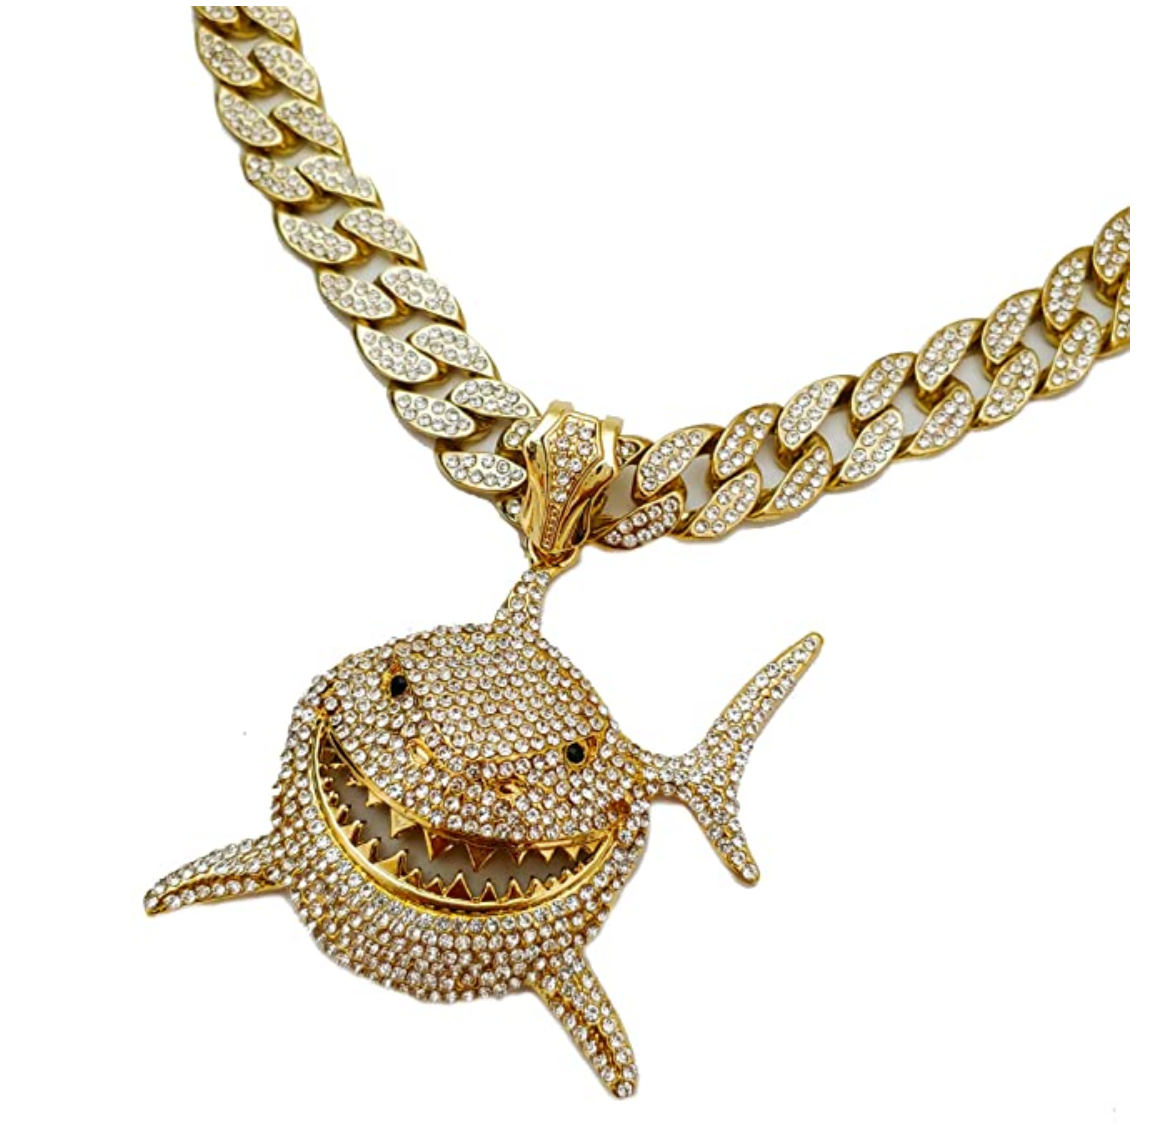 Shark Pendant Necklace Hip Hop Simulated Diamond Shark Chain Cuban Link Iced Out Silver Gold Color Metal Alloy 20in.